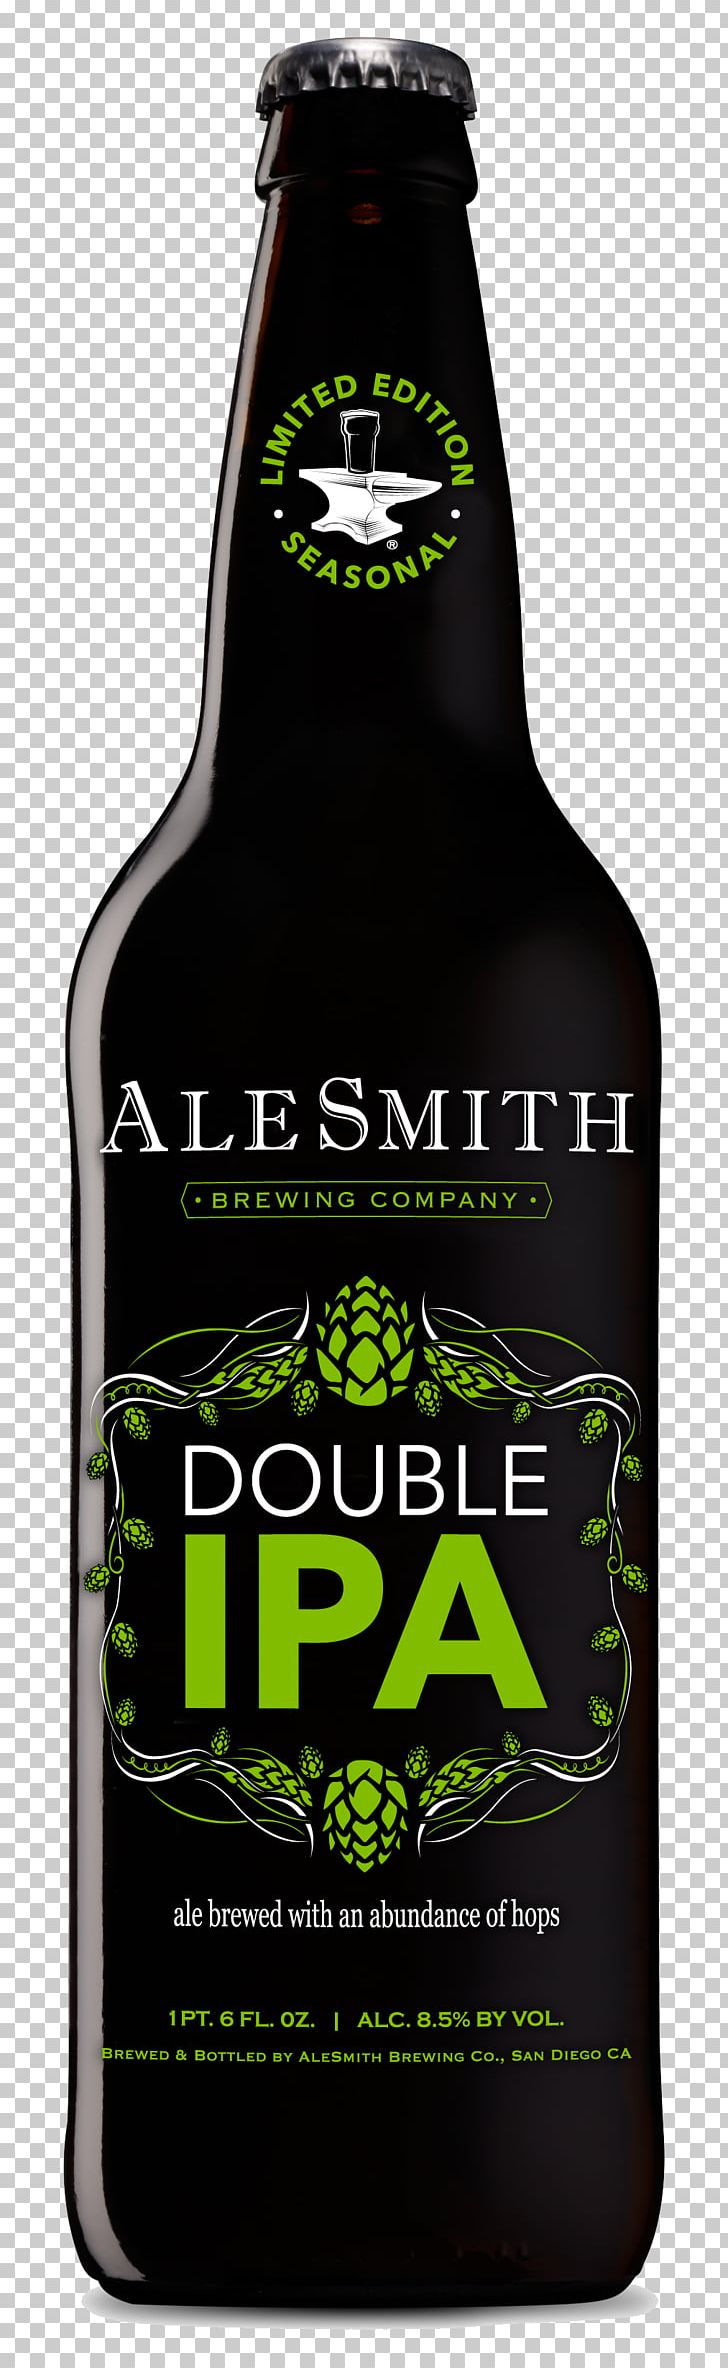 Beer AleSmith Brewing Company India Pale Ale Stout Porter PNG, Clipart, Alcoholic Beverage, Ale, Alesmith Brewing Company, Beer, Beer Bottle Free PNG Download